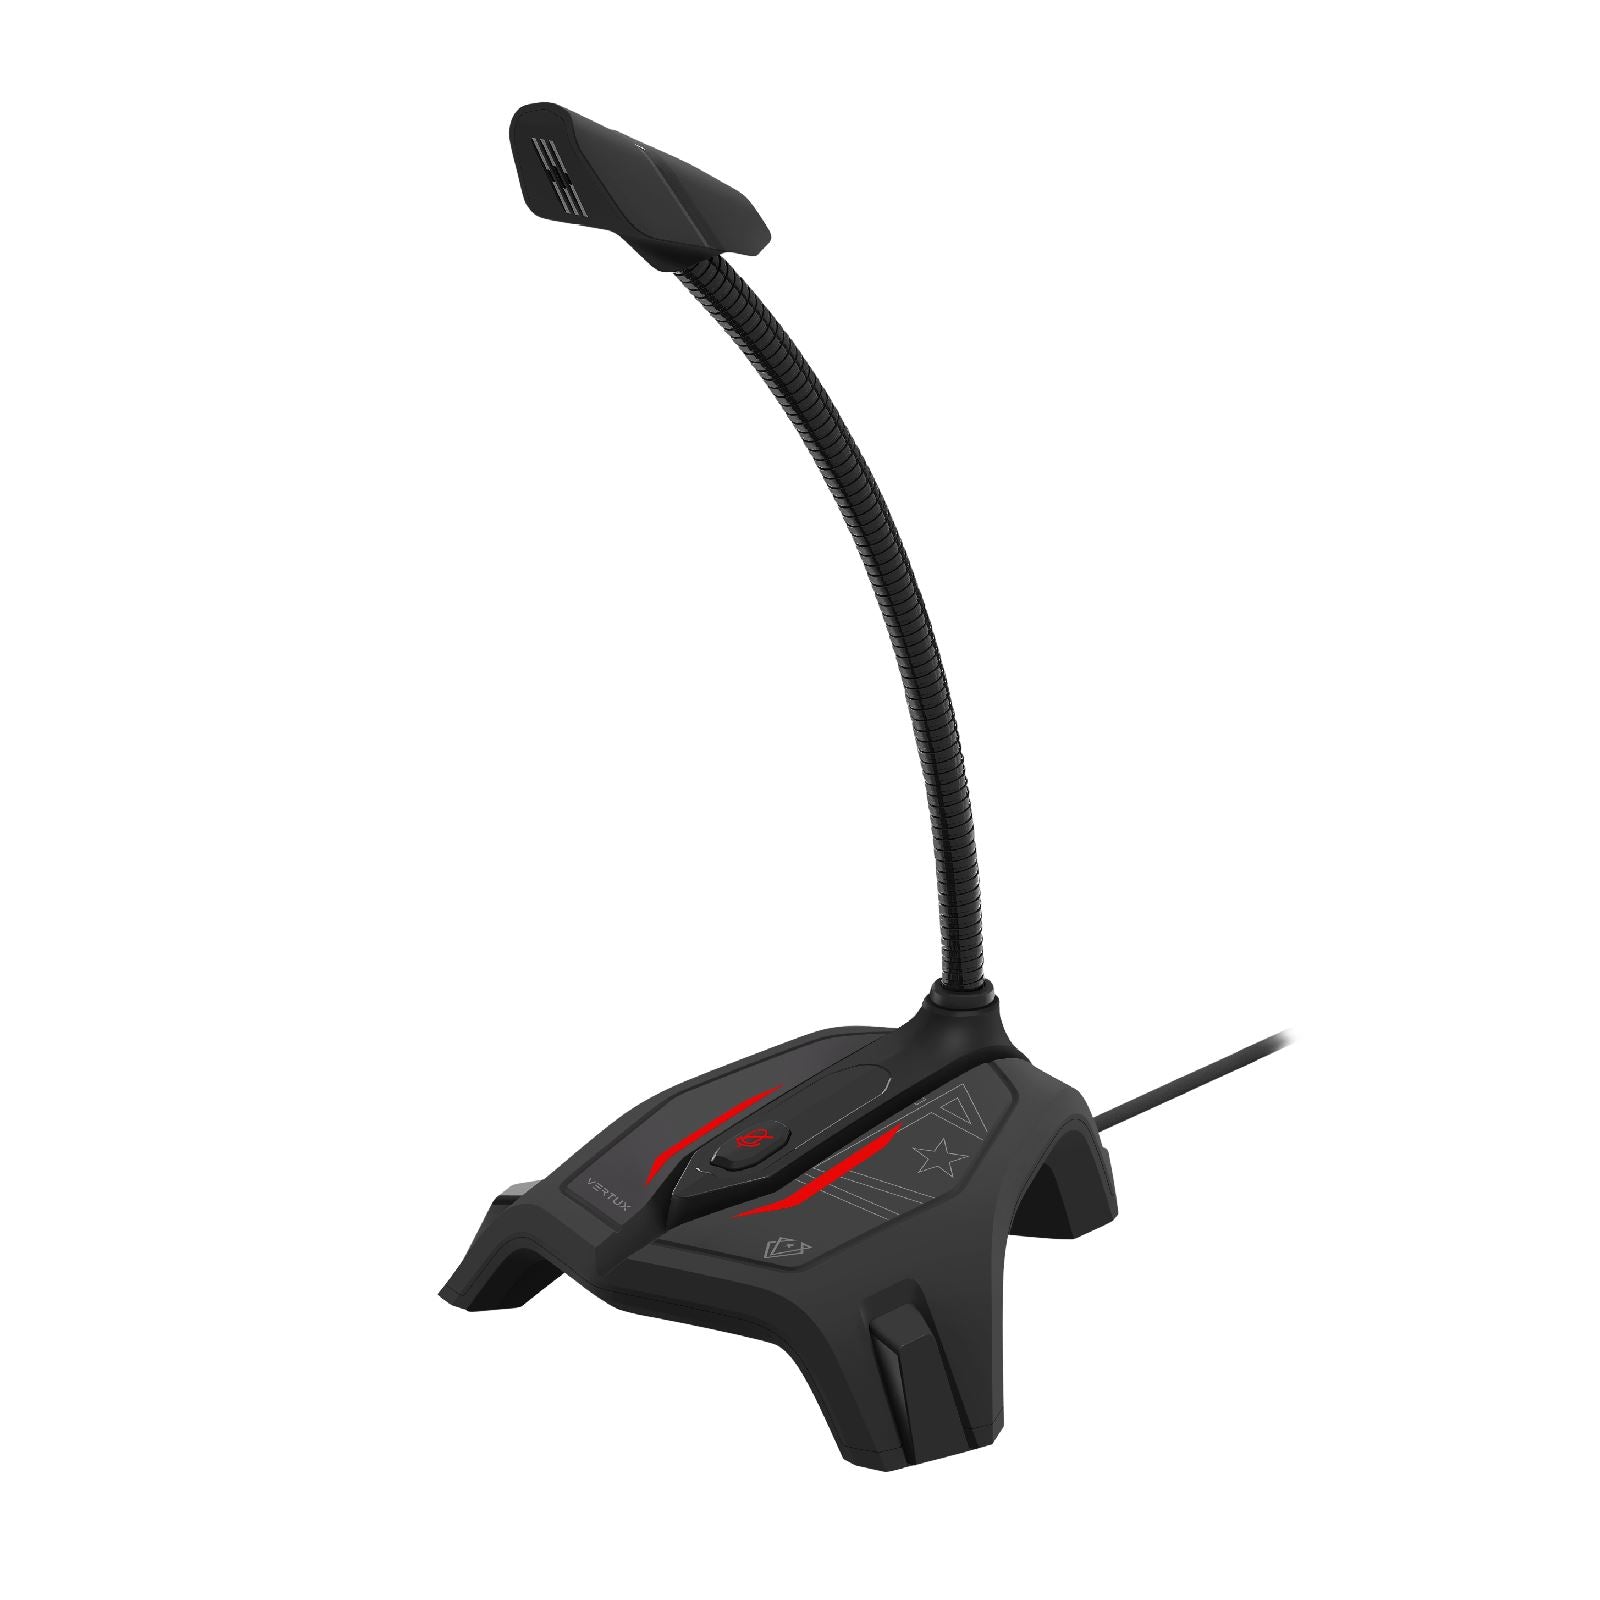 VERTUX_Gaming_Omni-directional_Distortion_Free_Microphone_with_Flexible_Gooseneck_Stand._One_Touch_Mute._Audio_Jack_Out._LED_Backlights._USB_Connector._Plug_&_Play._Black_Colour